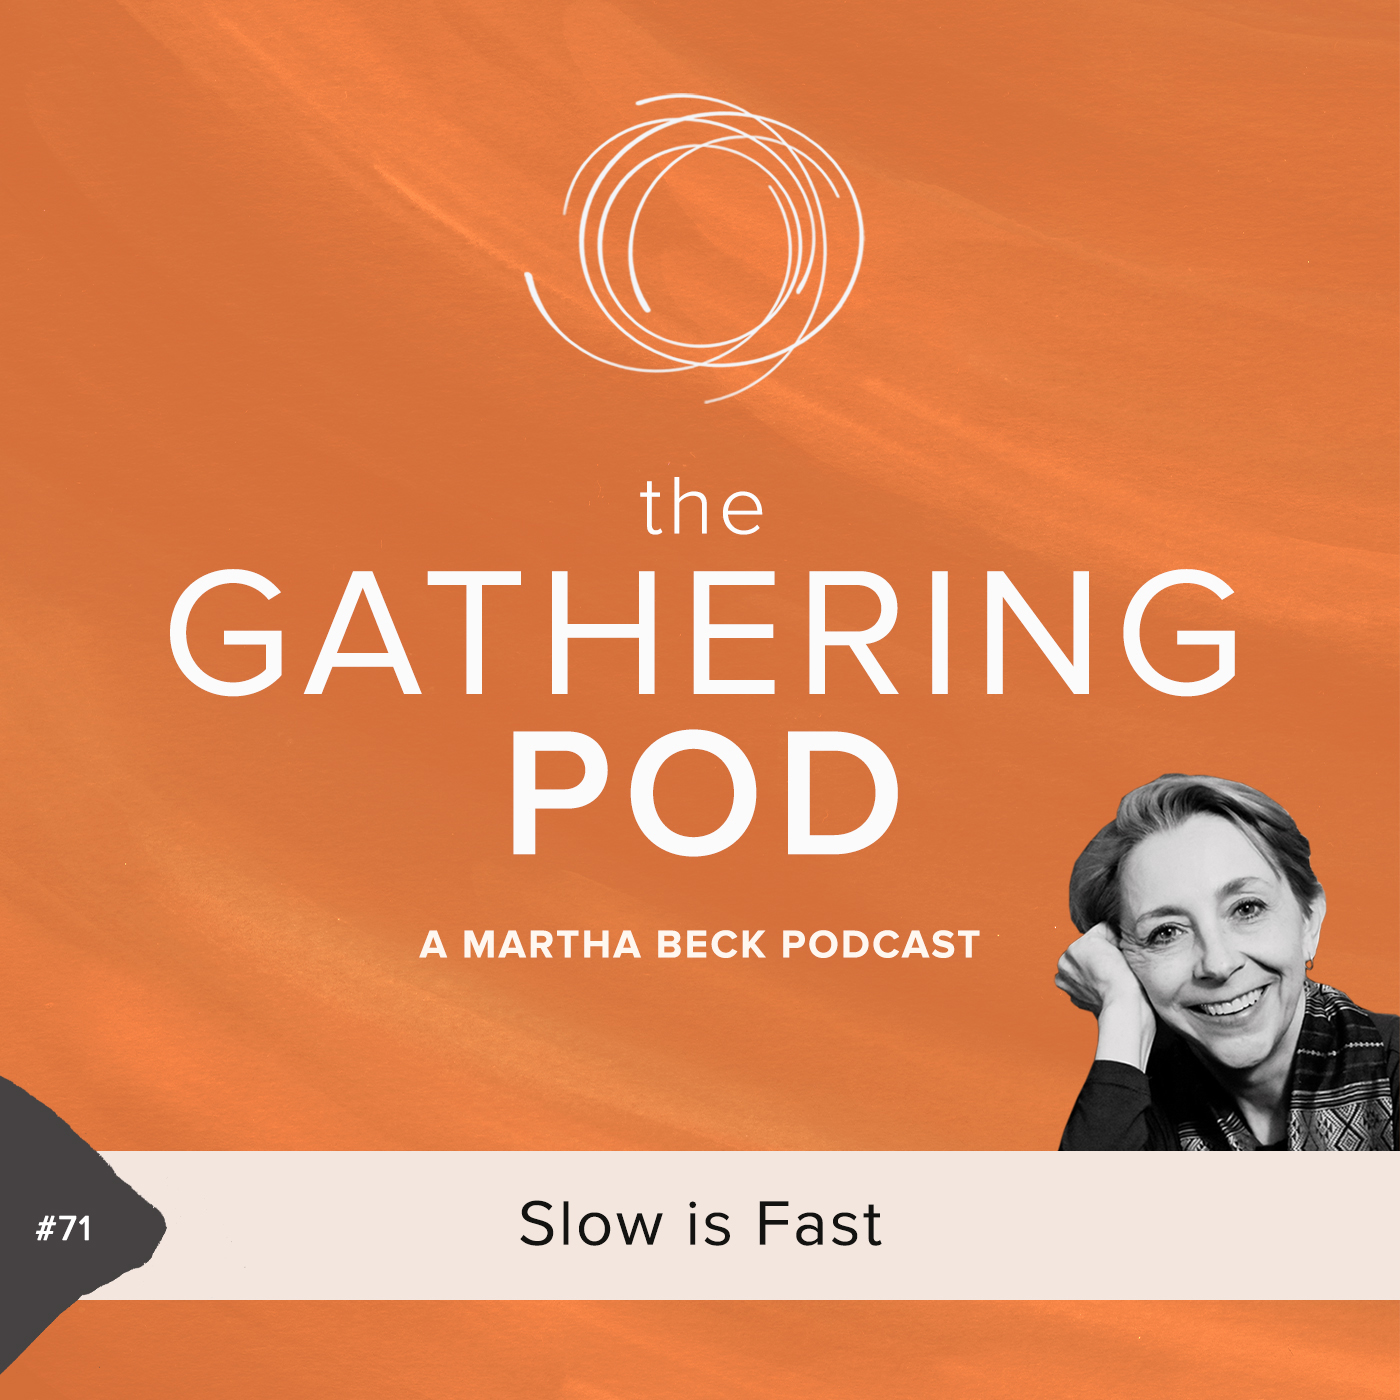 Image for The Gathering Pod A Martha Beck Podcast Episode #71 Slow is Fast